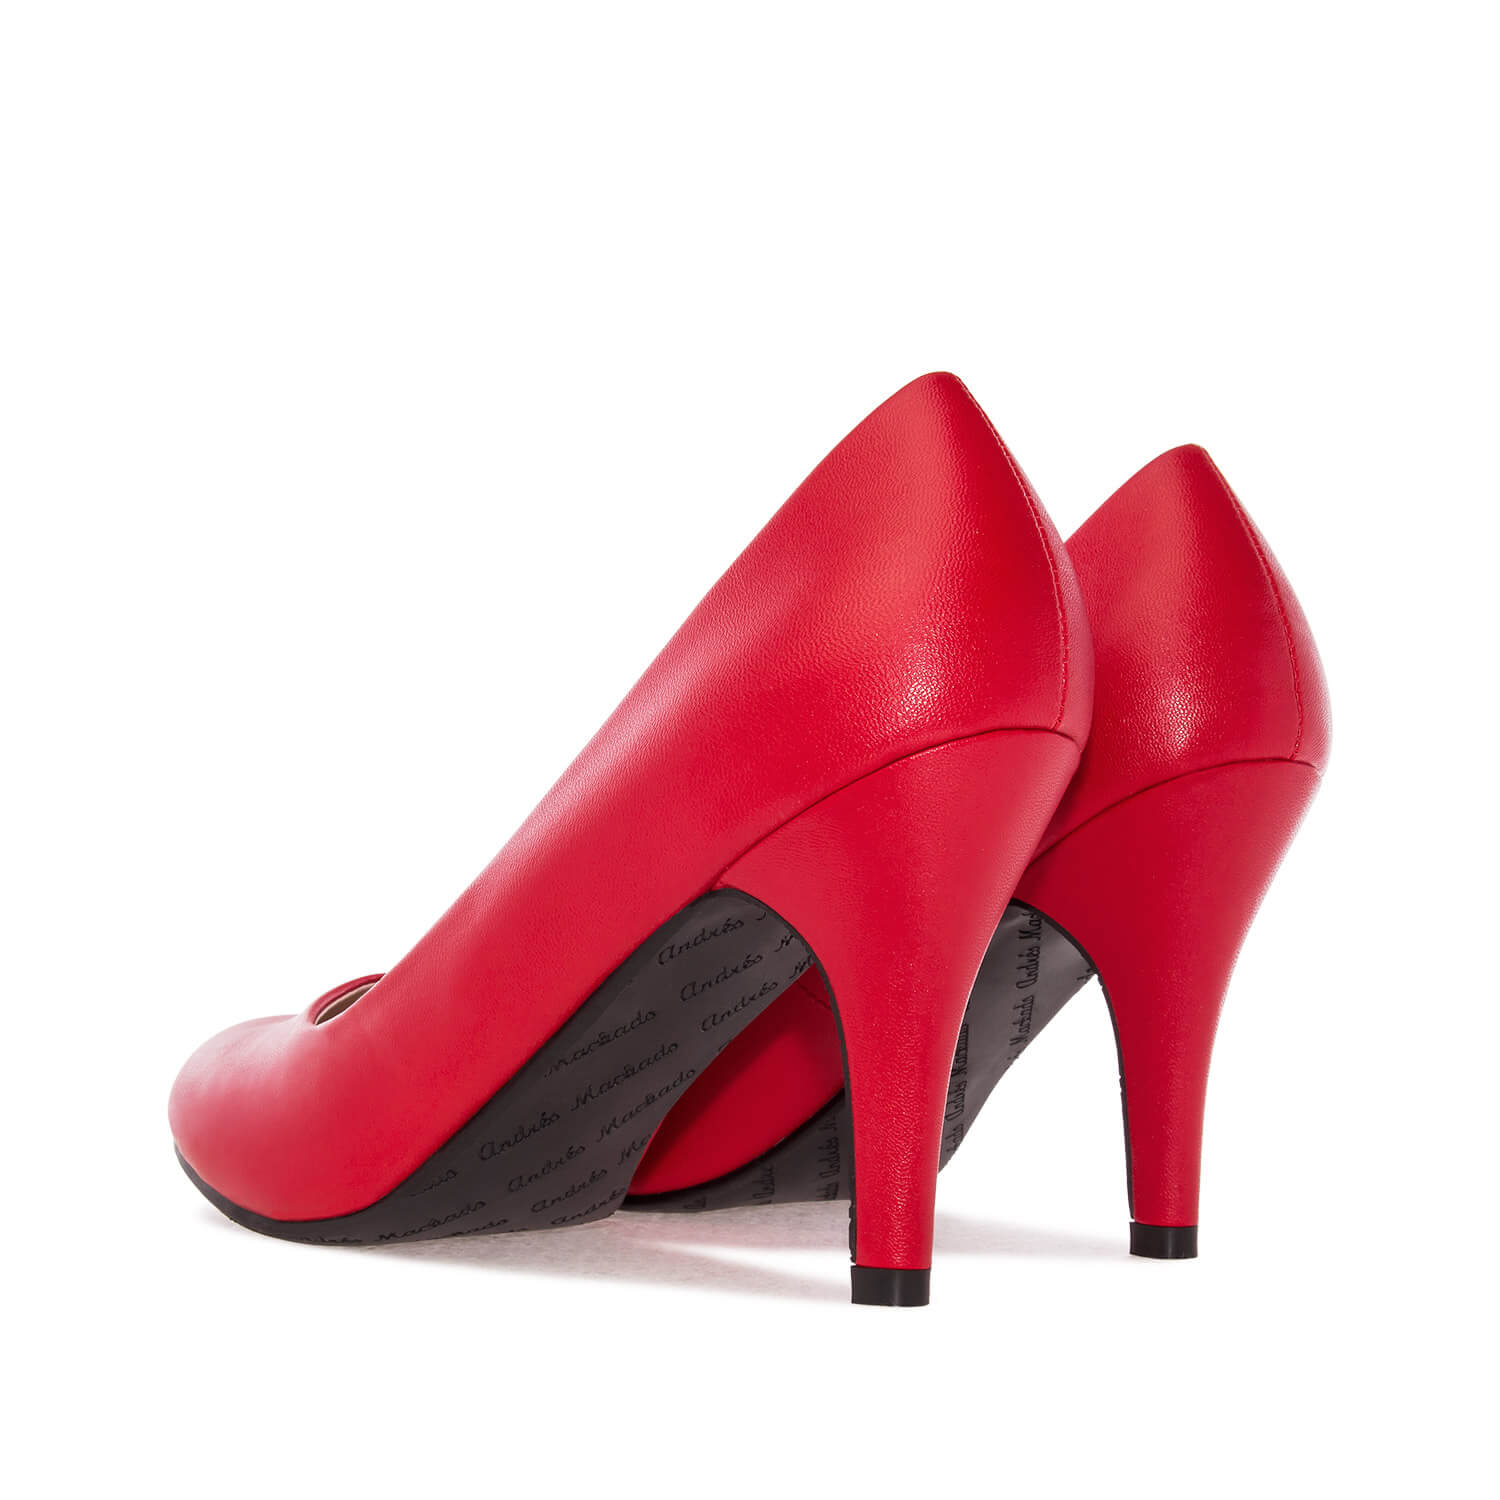 Retro High Heel Pumps in Red faux Leather 